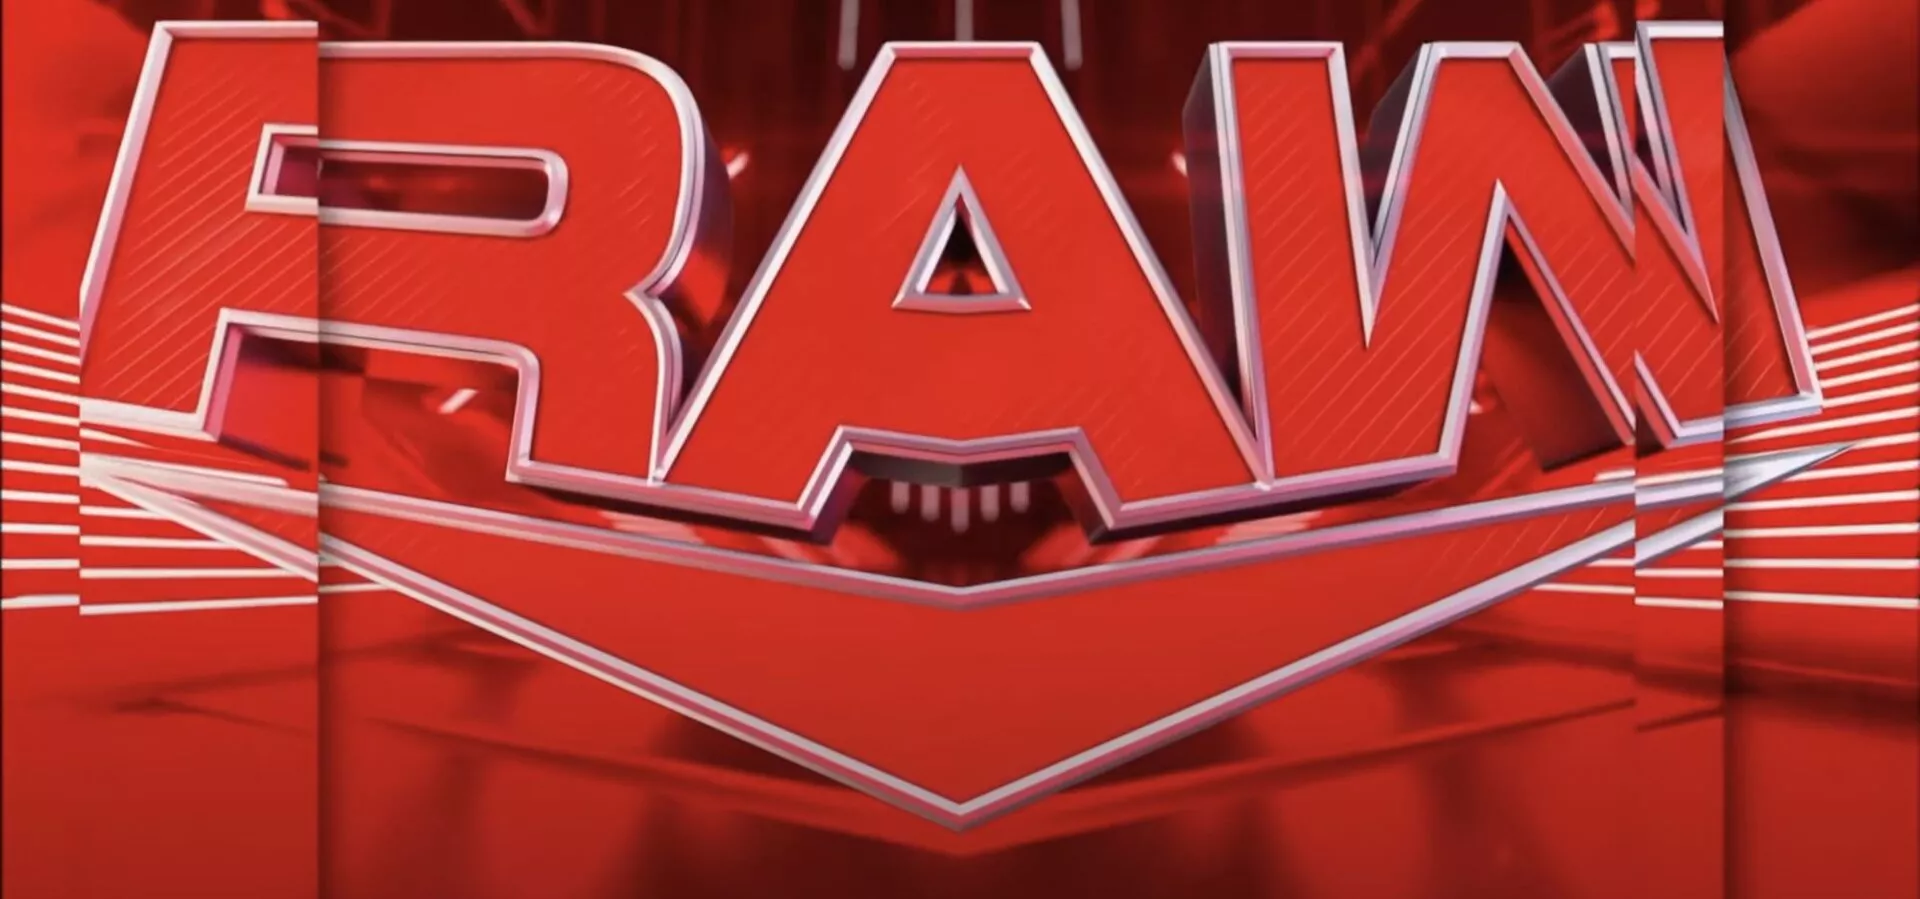 WWE Raw (5 June 2023): Matches, news, rumors, predicted matches, timings, telecast details